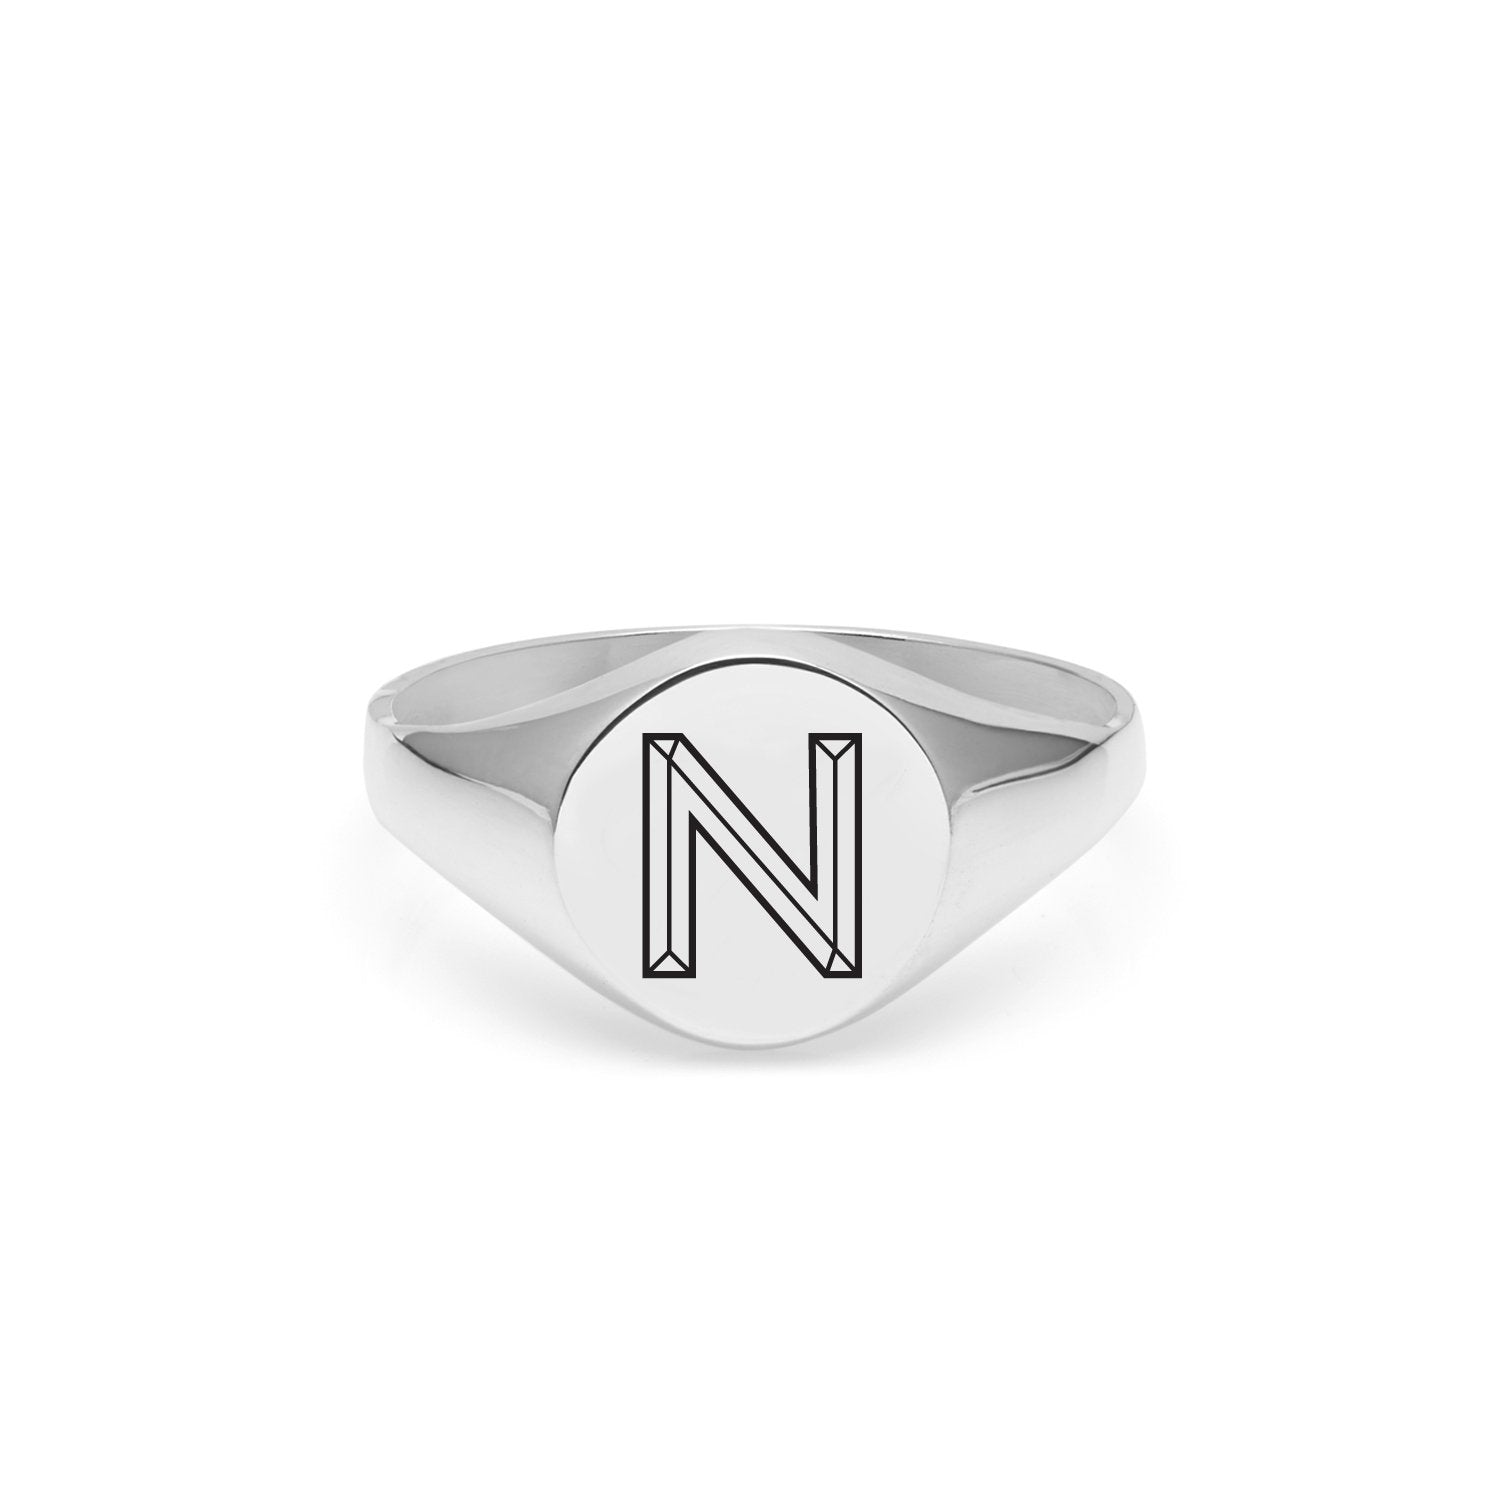 Facett Initial N Round Signet Ring - Silver - Myia Bonner Jewellery